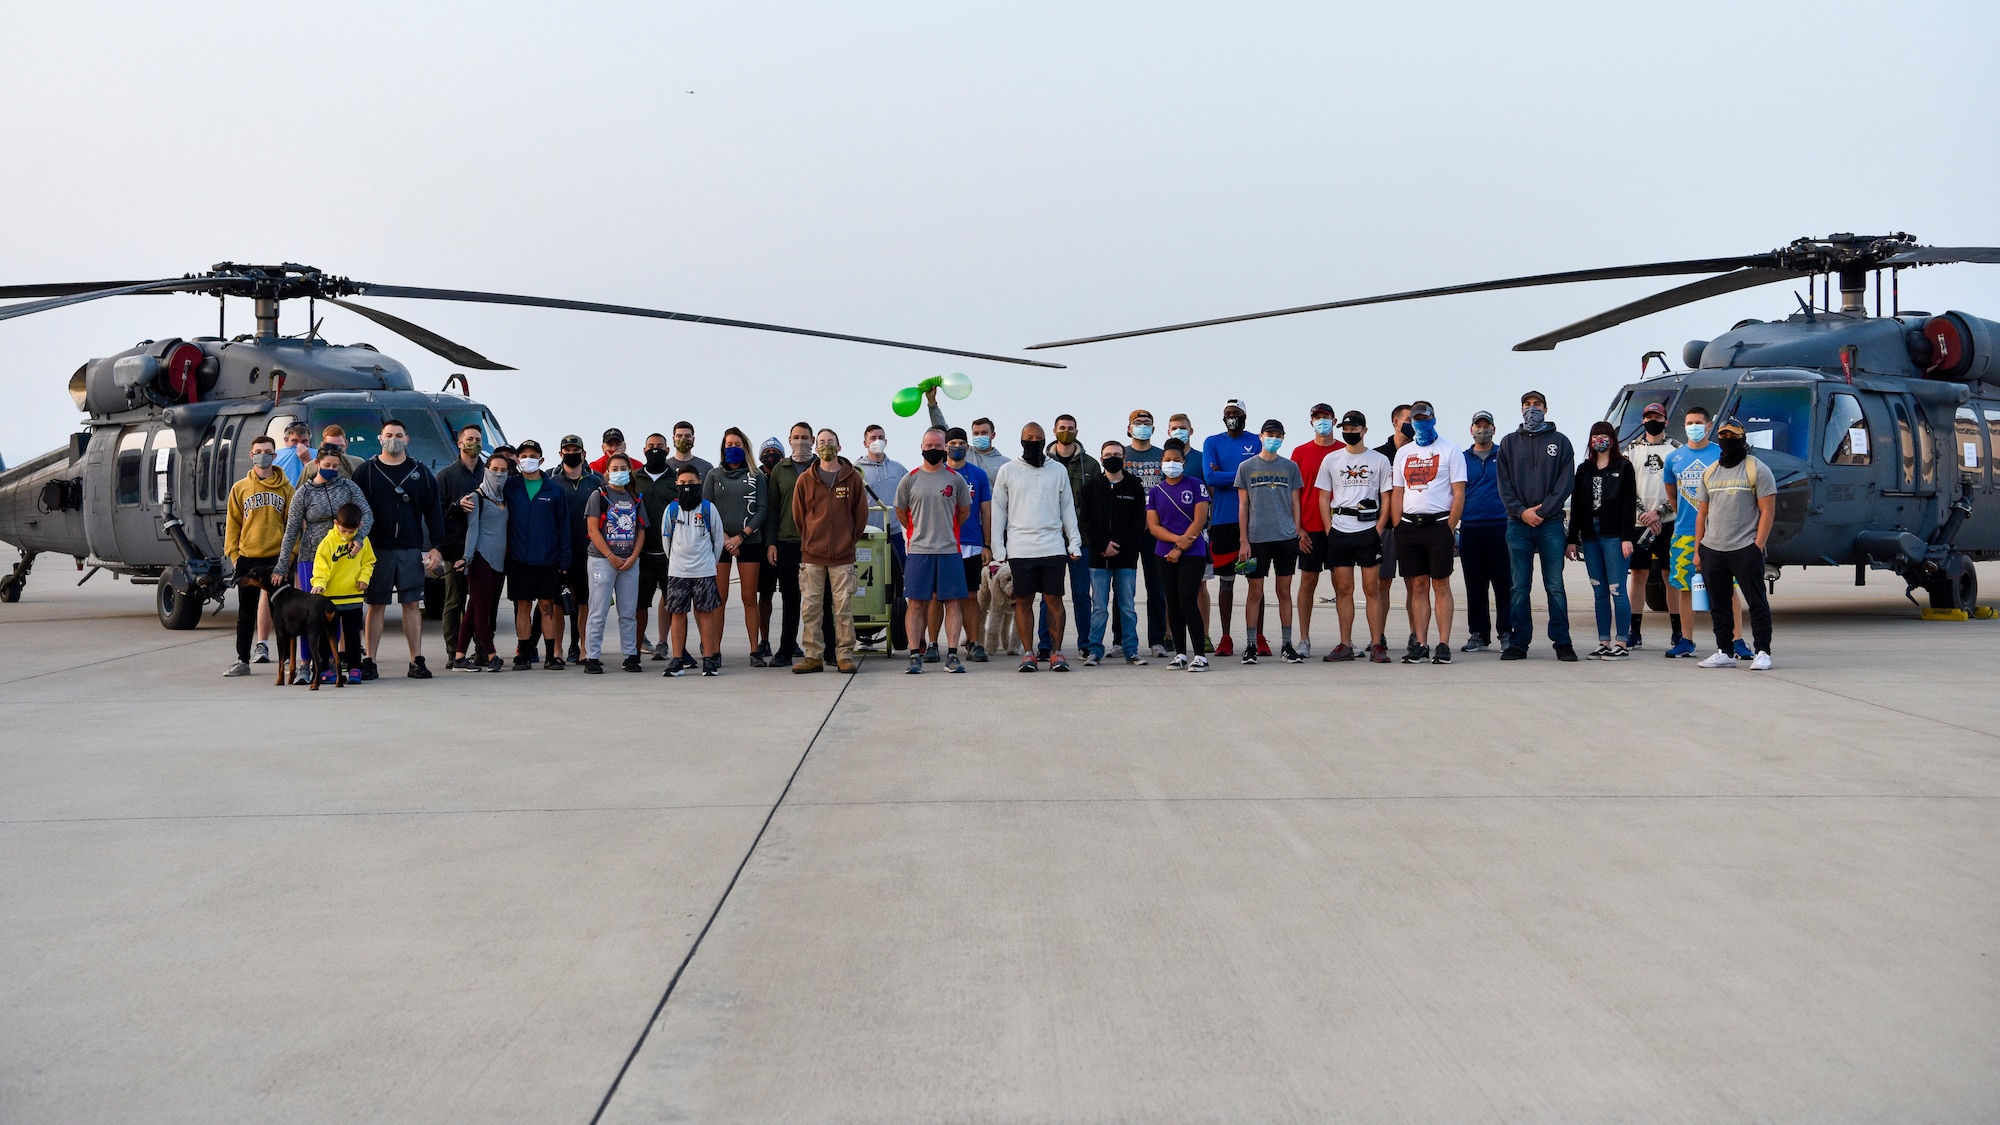 Group photo of 40 people standing between two helicopters.